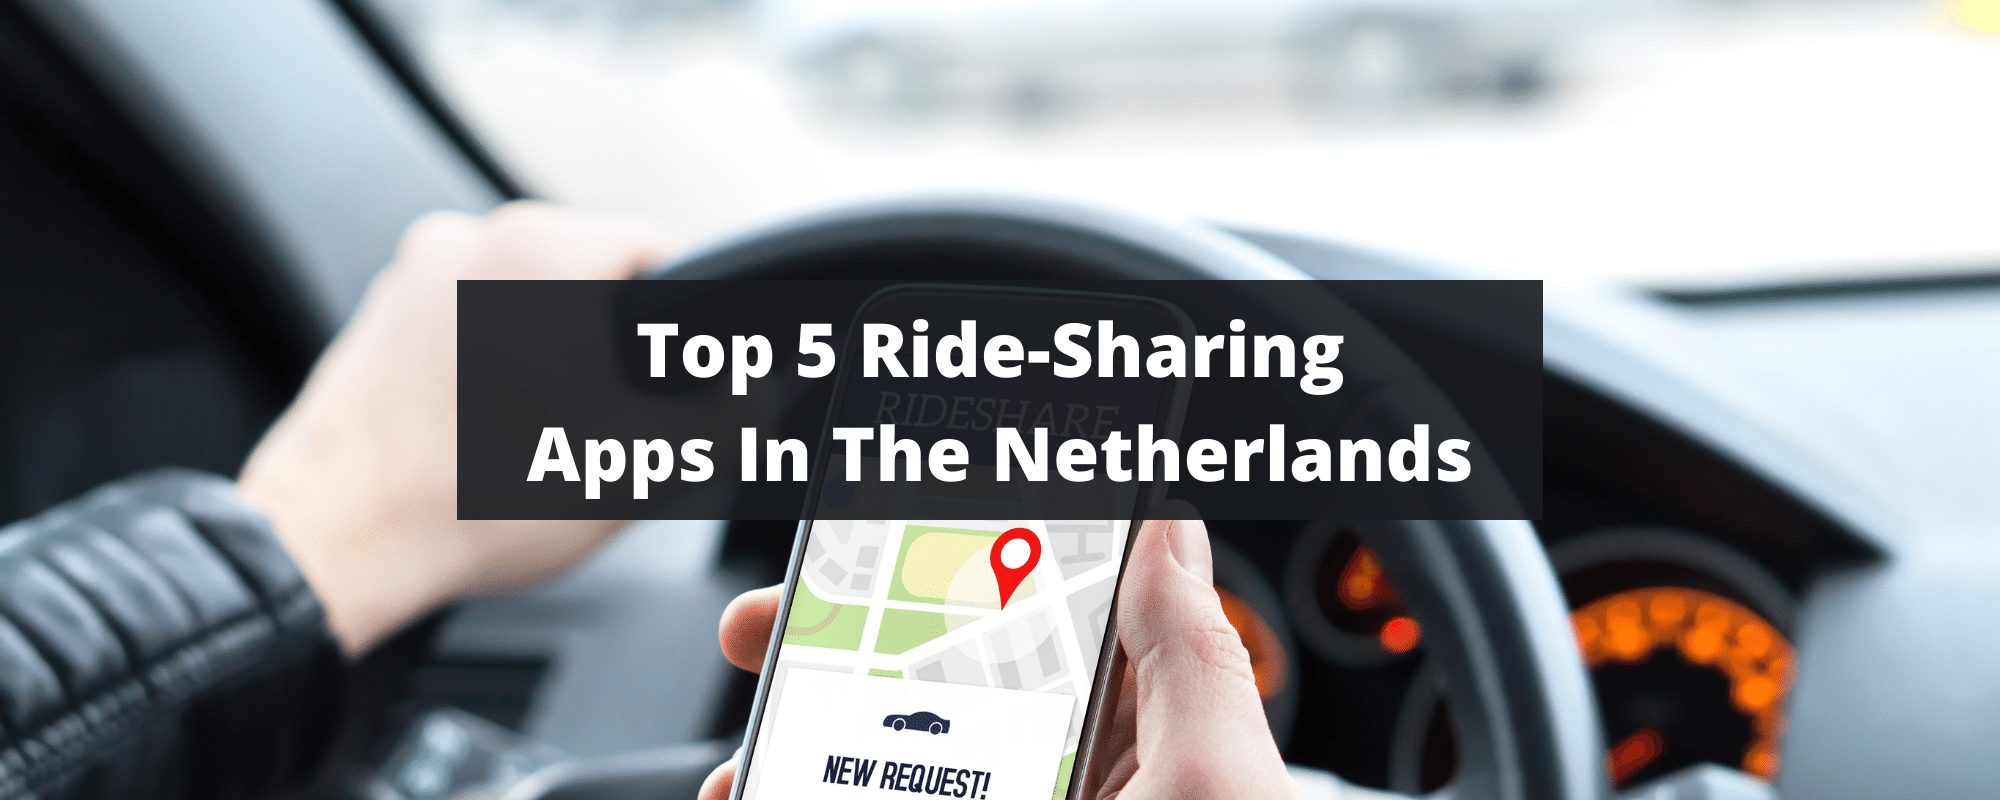 ride-sharing apps in the netherlands